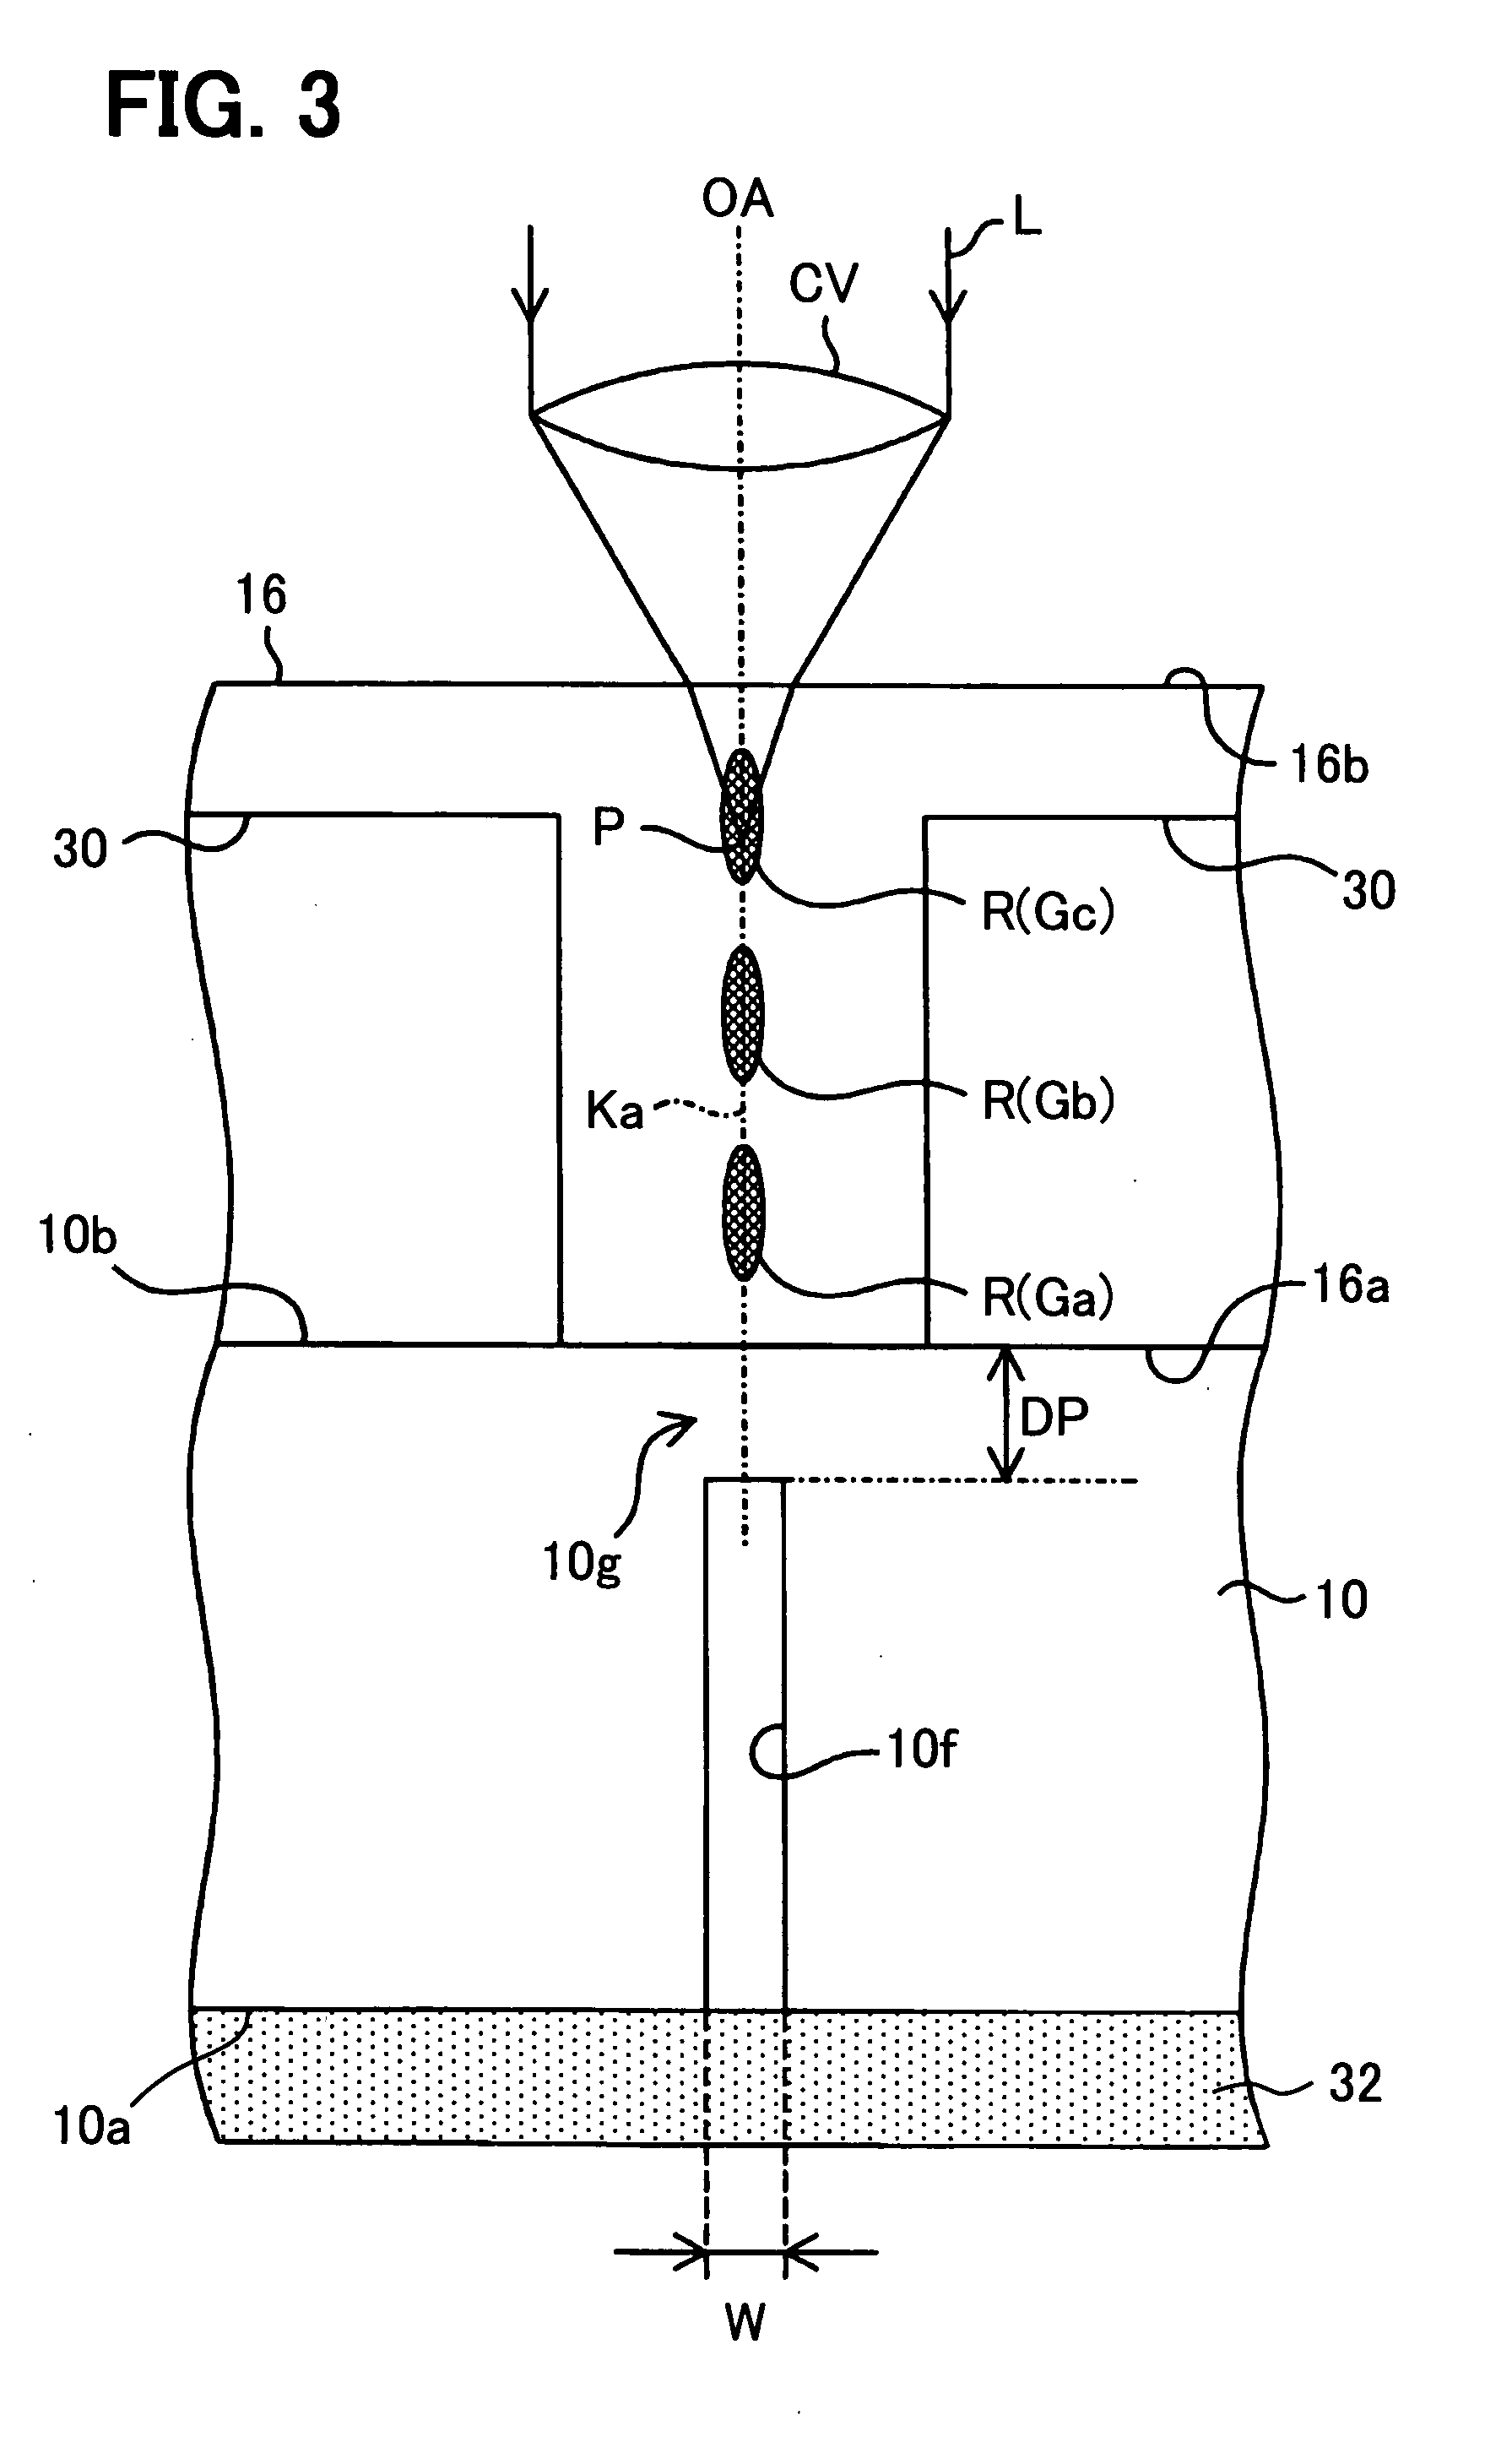 Chip and method for dicing wafer into chips